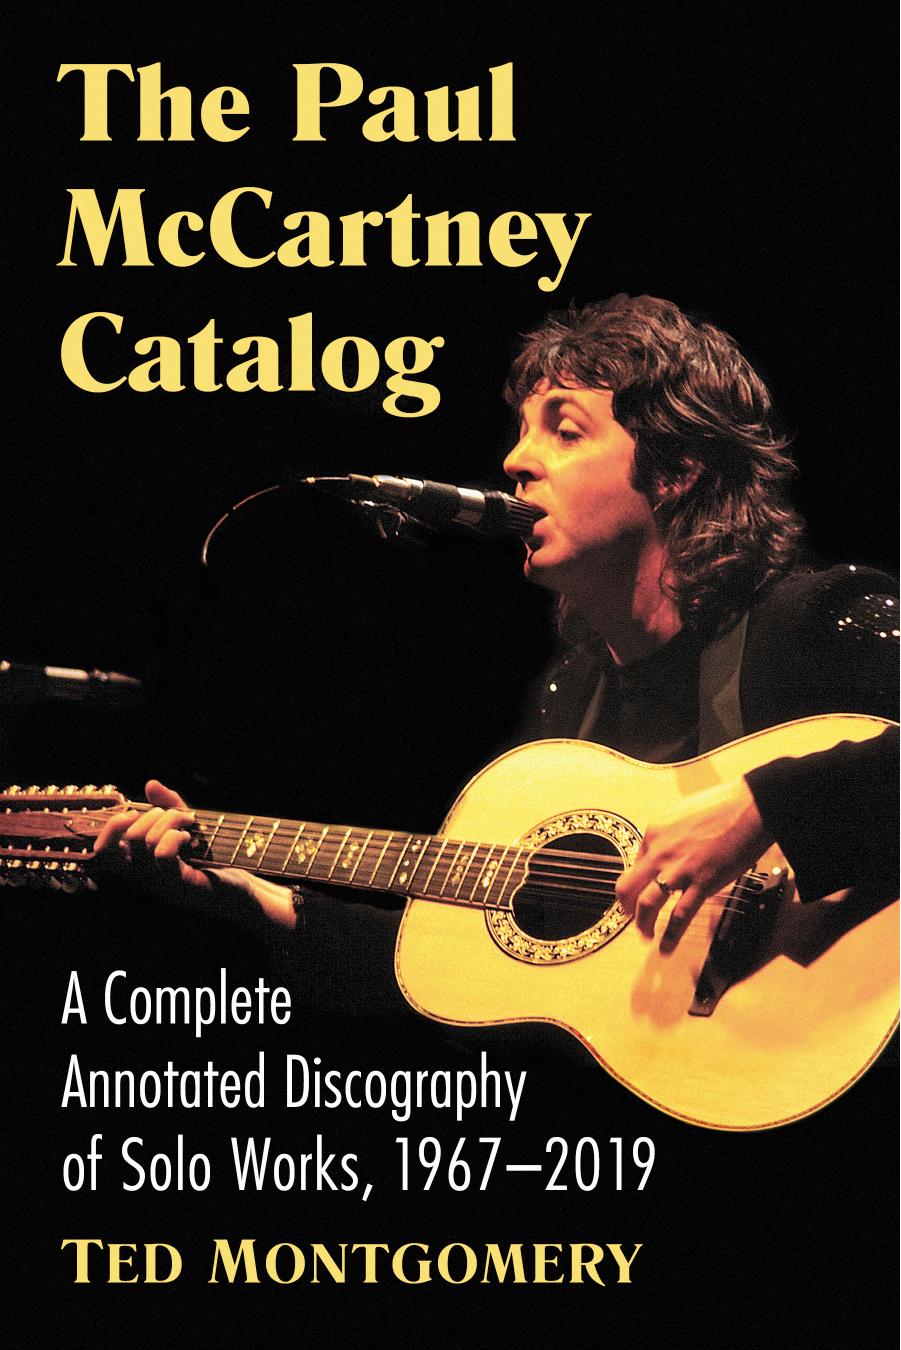 The Paul Mccartney Catalog: A Complete Annotated Discography of Solo Works, 1967-2019 by Ted Montgomery